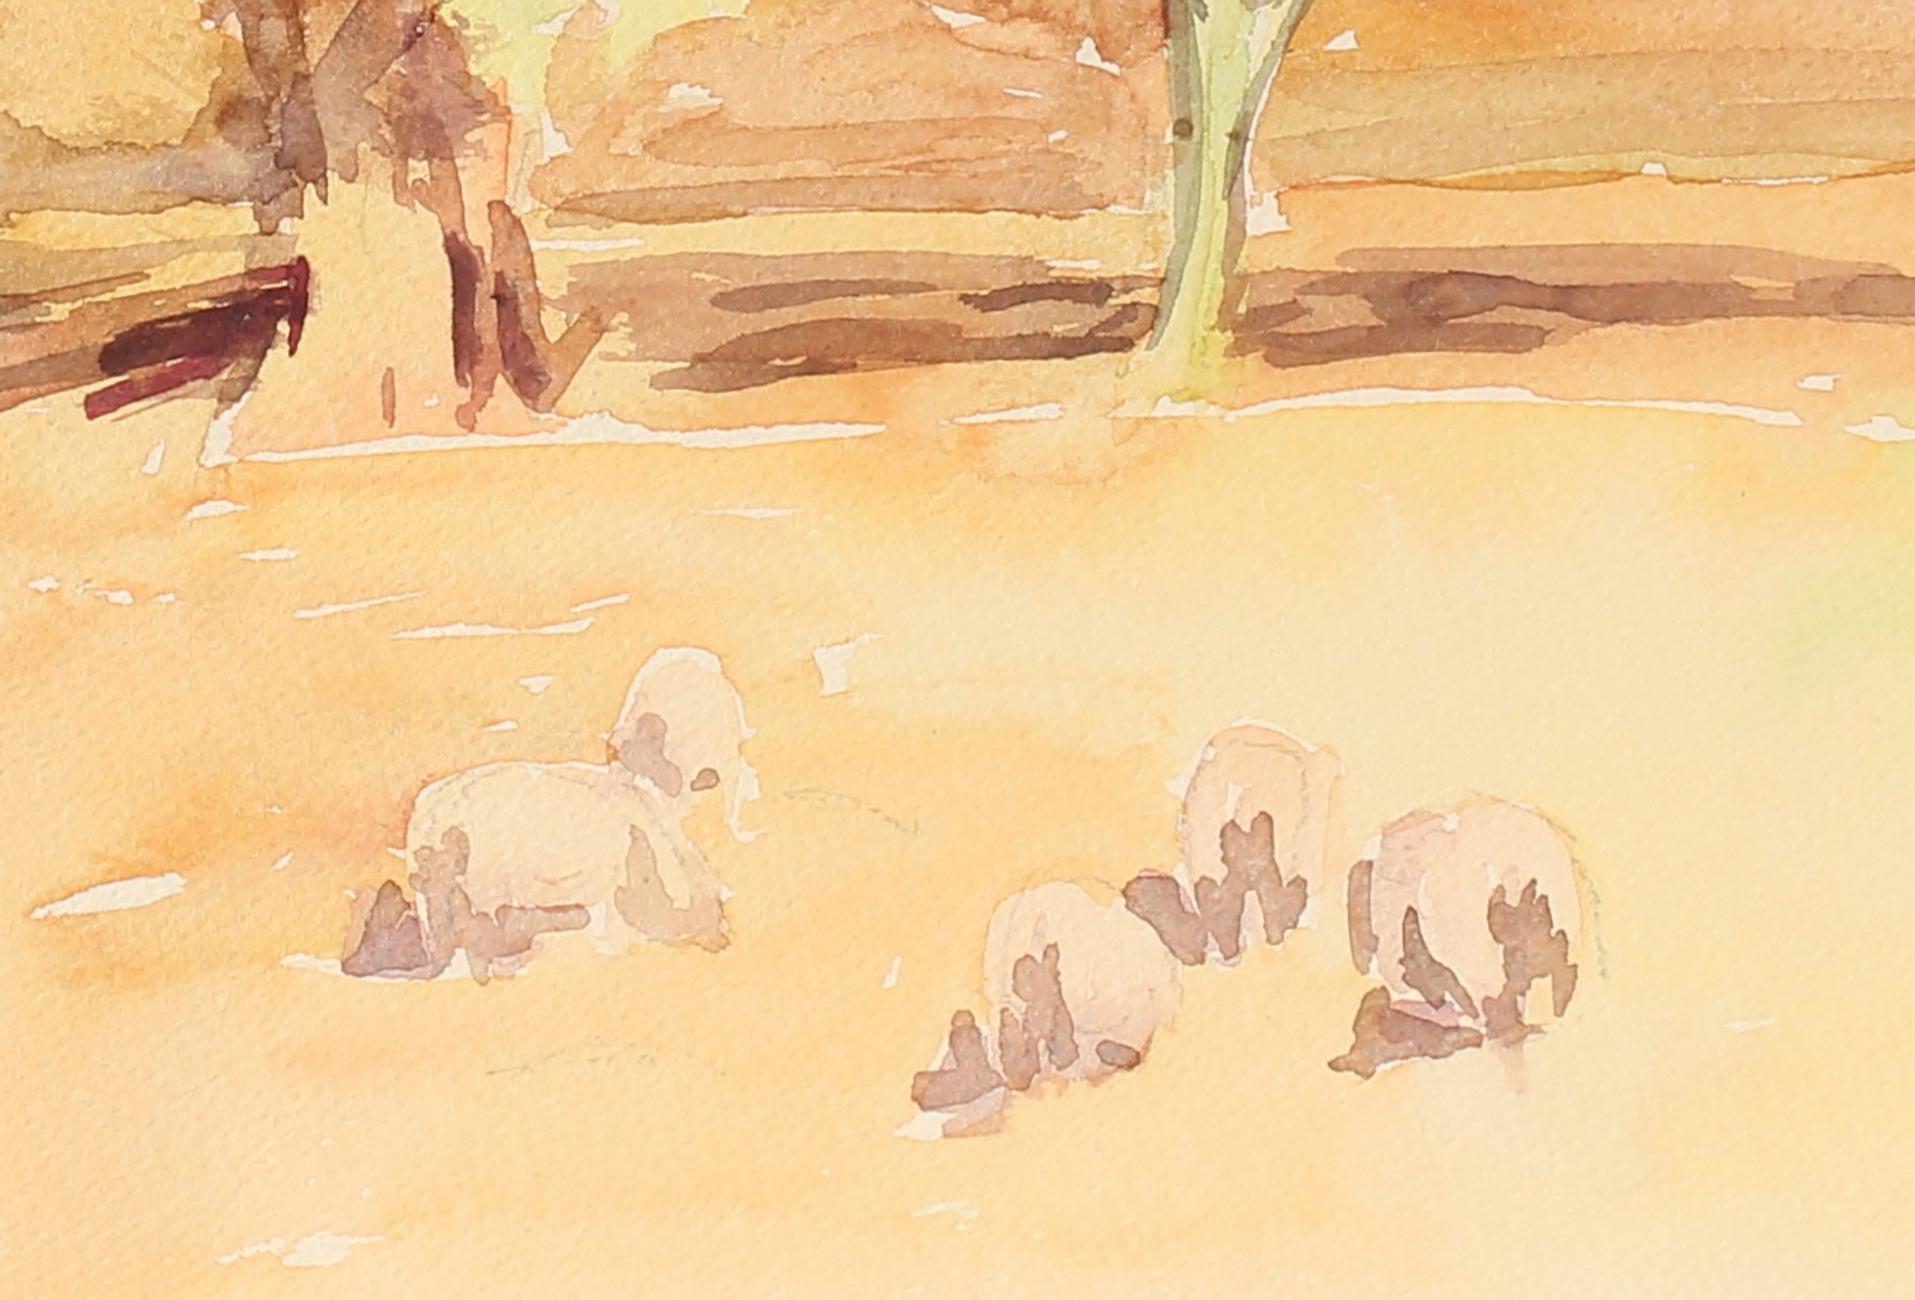 Northern California Landscape with Eucalyptus and Sheep, Watercolor Painting - American Modern Art by Sadie Van Patten Hall